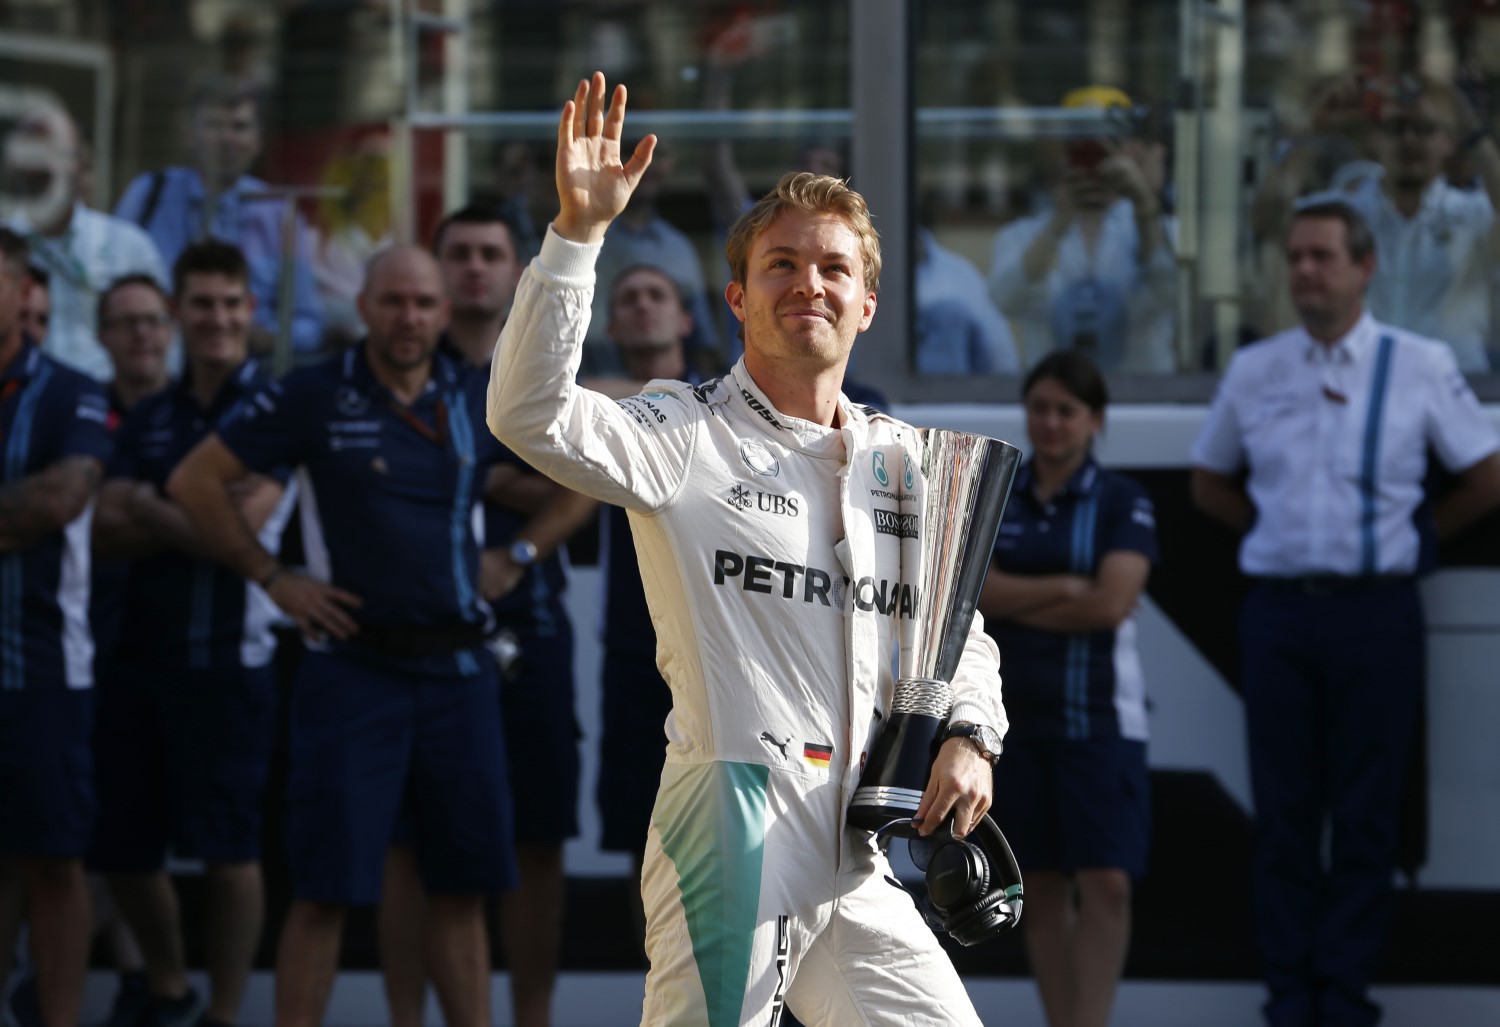 Nico Rosberg won the 2016 F1 title then retired